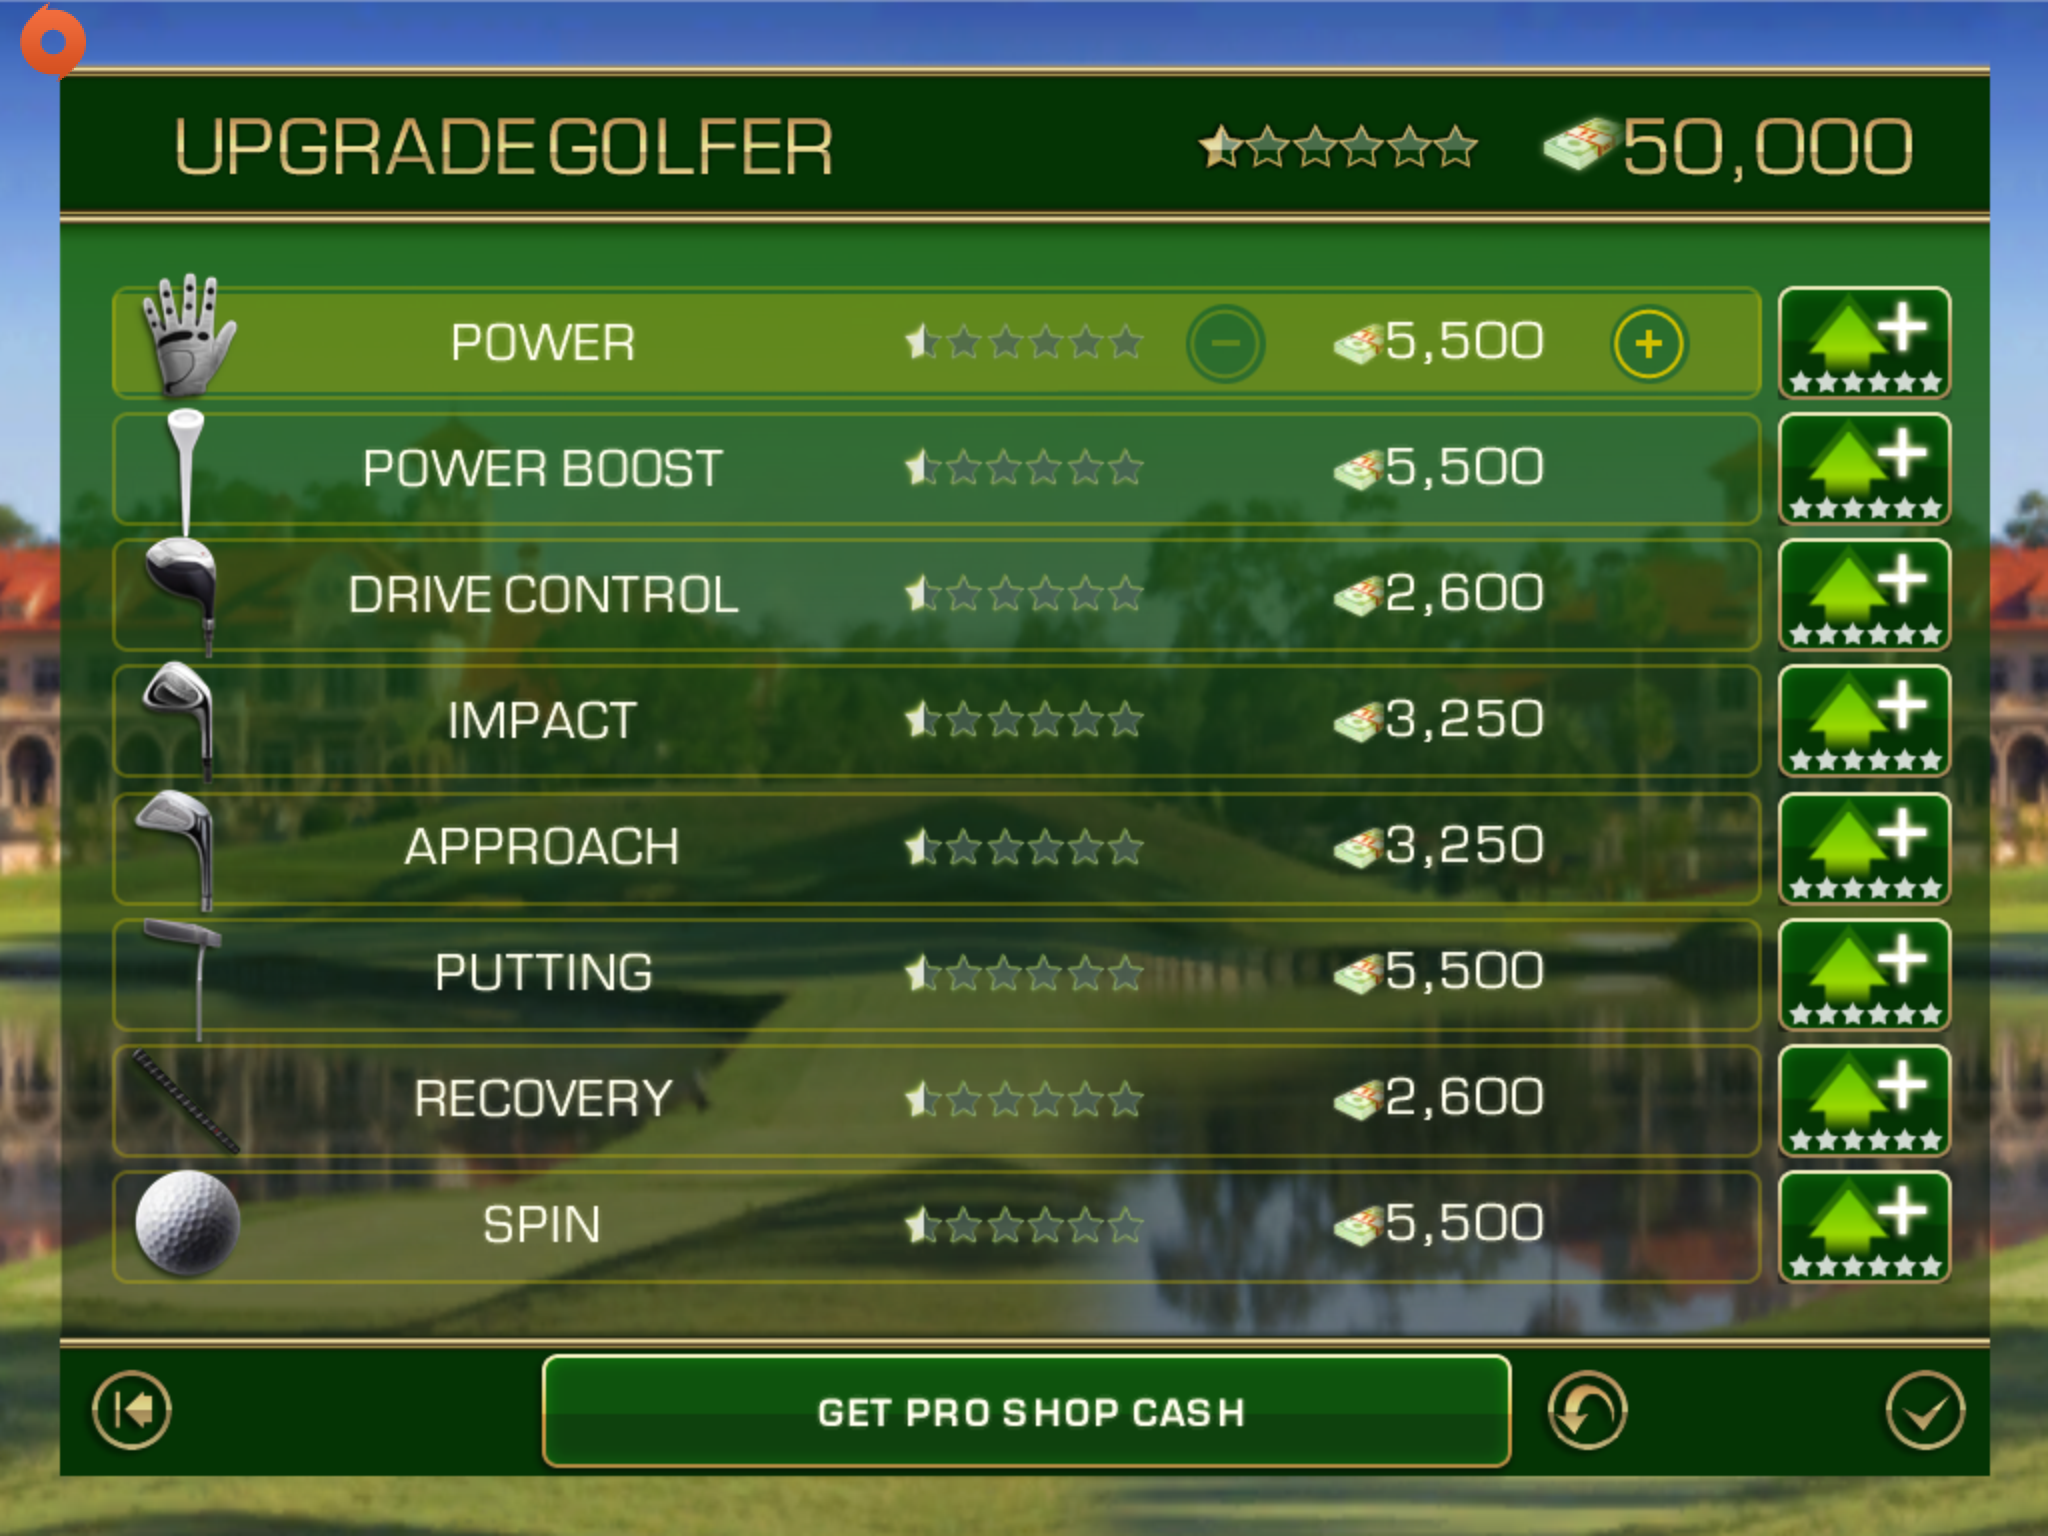 Skills screen in Tiger Woods PGA Tour 12 for iOS